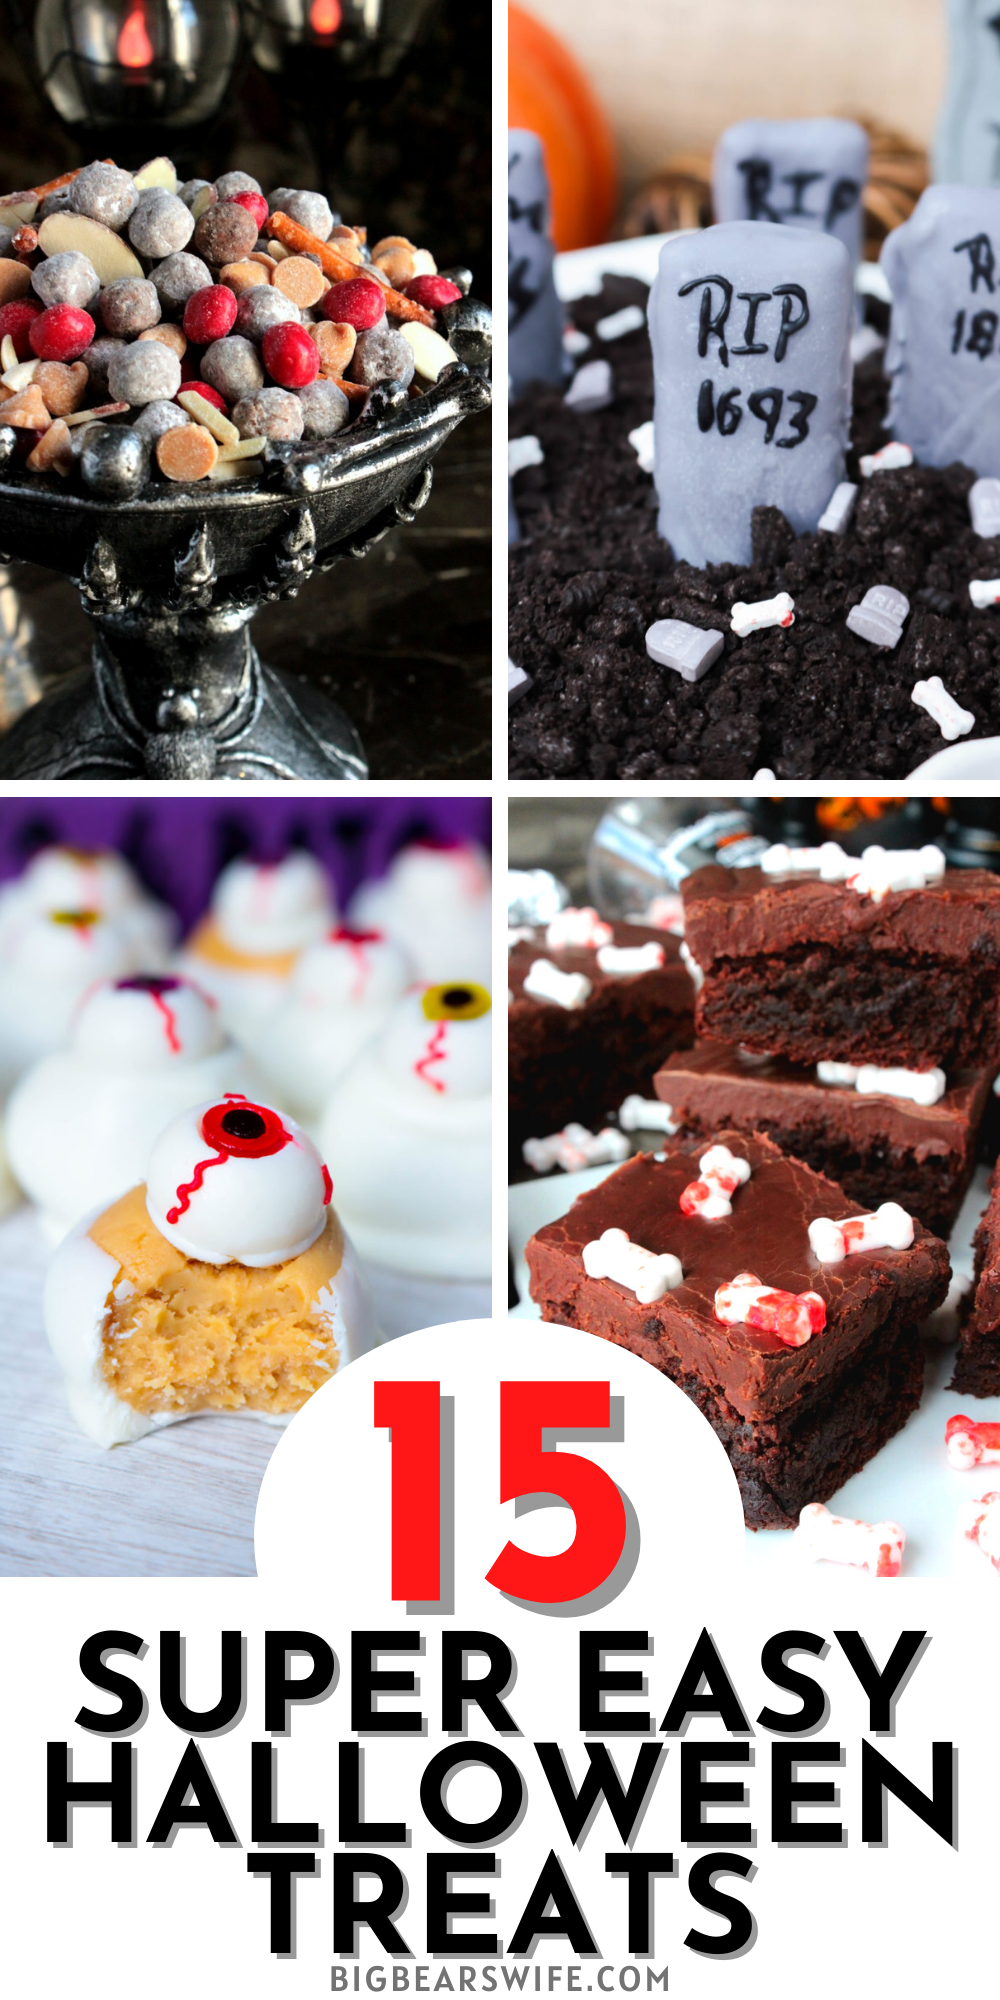 15 SUPER EASY HALLOWEEN TREATS - If you want to make some great Halloween desserts and Halloween treats without spending a ton of time in the kitchen you'll want this list of 15 Super Easy Halloween Treats recipes! No bake eclairs, apple slices, sheet cakes and more are easily transformed into Halloween desserts without any fuss or witchy magic!  via @bigbearswife